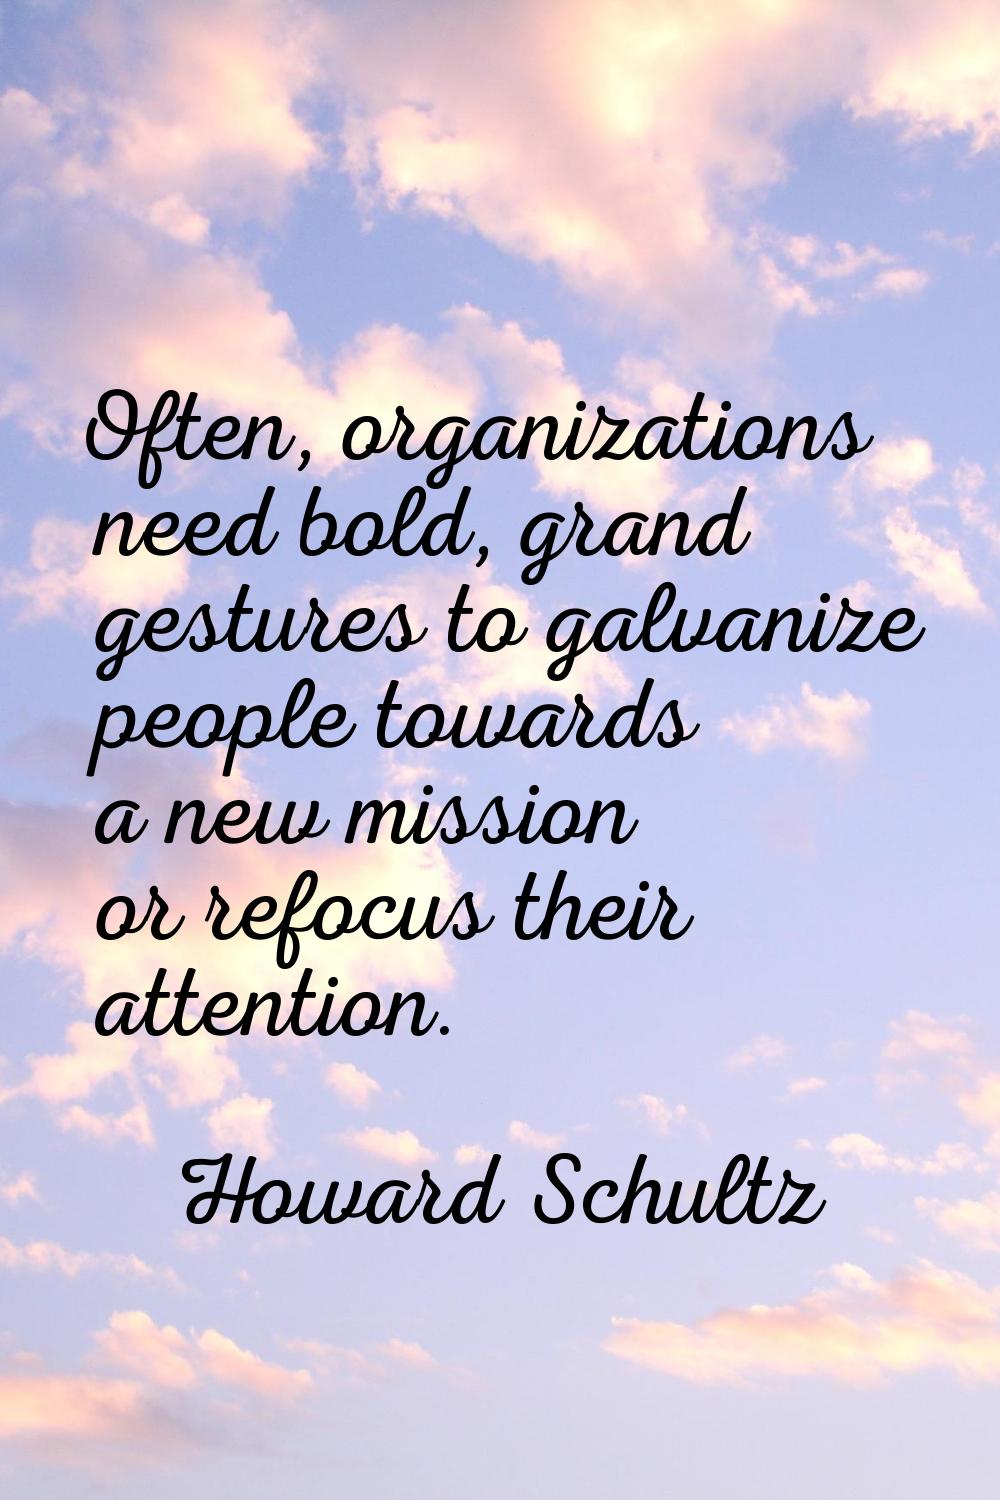 Often, organizations need bold, grand gestures to galvanize people towards a new mission or refocus